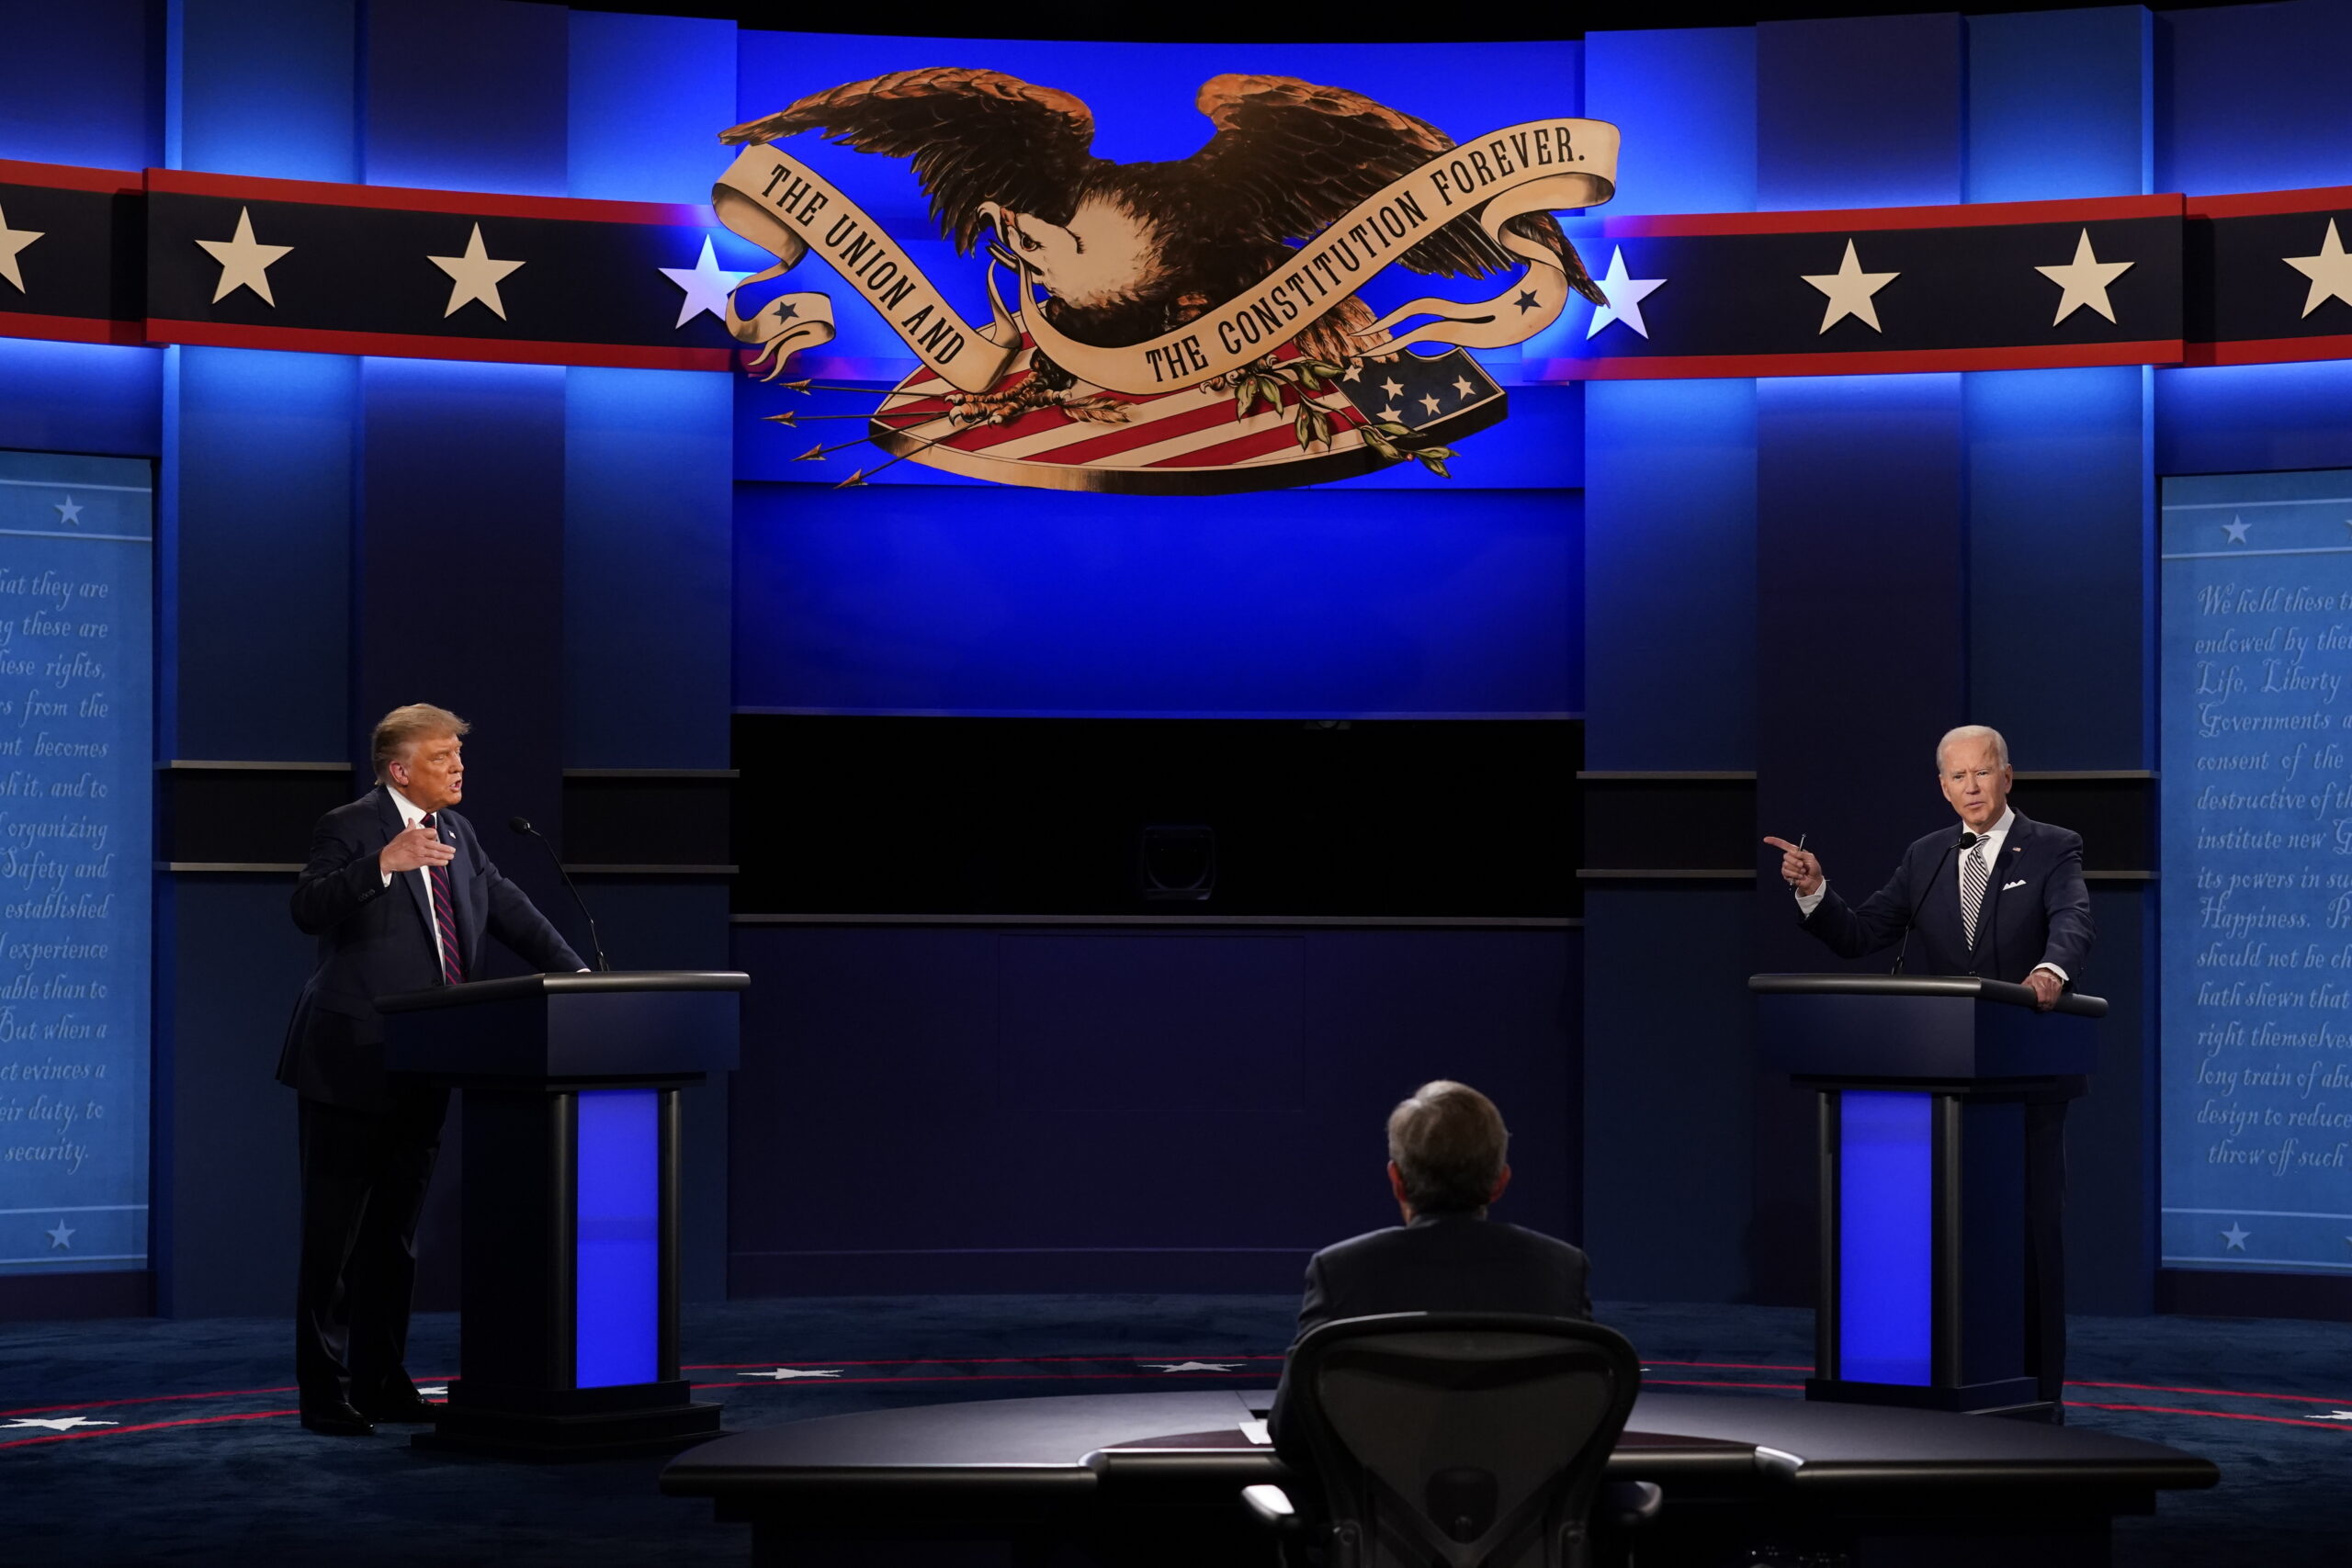 FILE - President Donald Trump, left, and Democratic presidential candidate former Vice President Joe Biden, right, with moderator Chris Wallace, center, of Fox News during the first presidential debate on Sept. 29, 2020, at Case Western University and Cleveland Clinic, in Cleveland, Ohio. (AP Photo/Patrick Semansky, File)